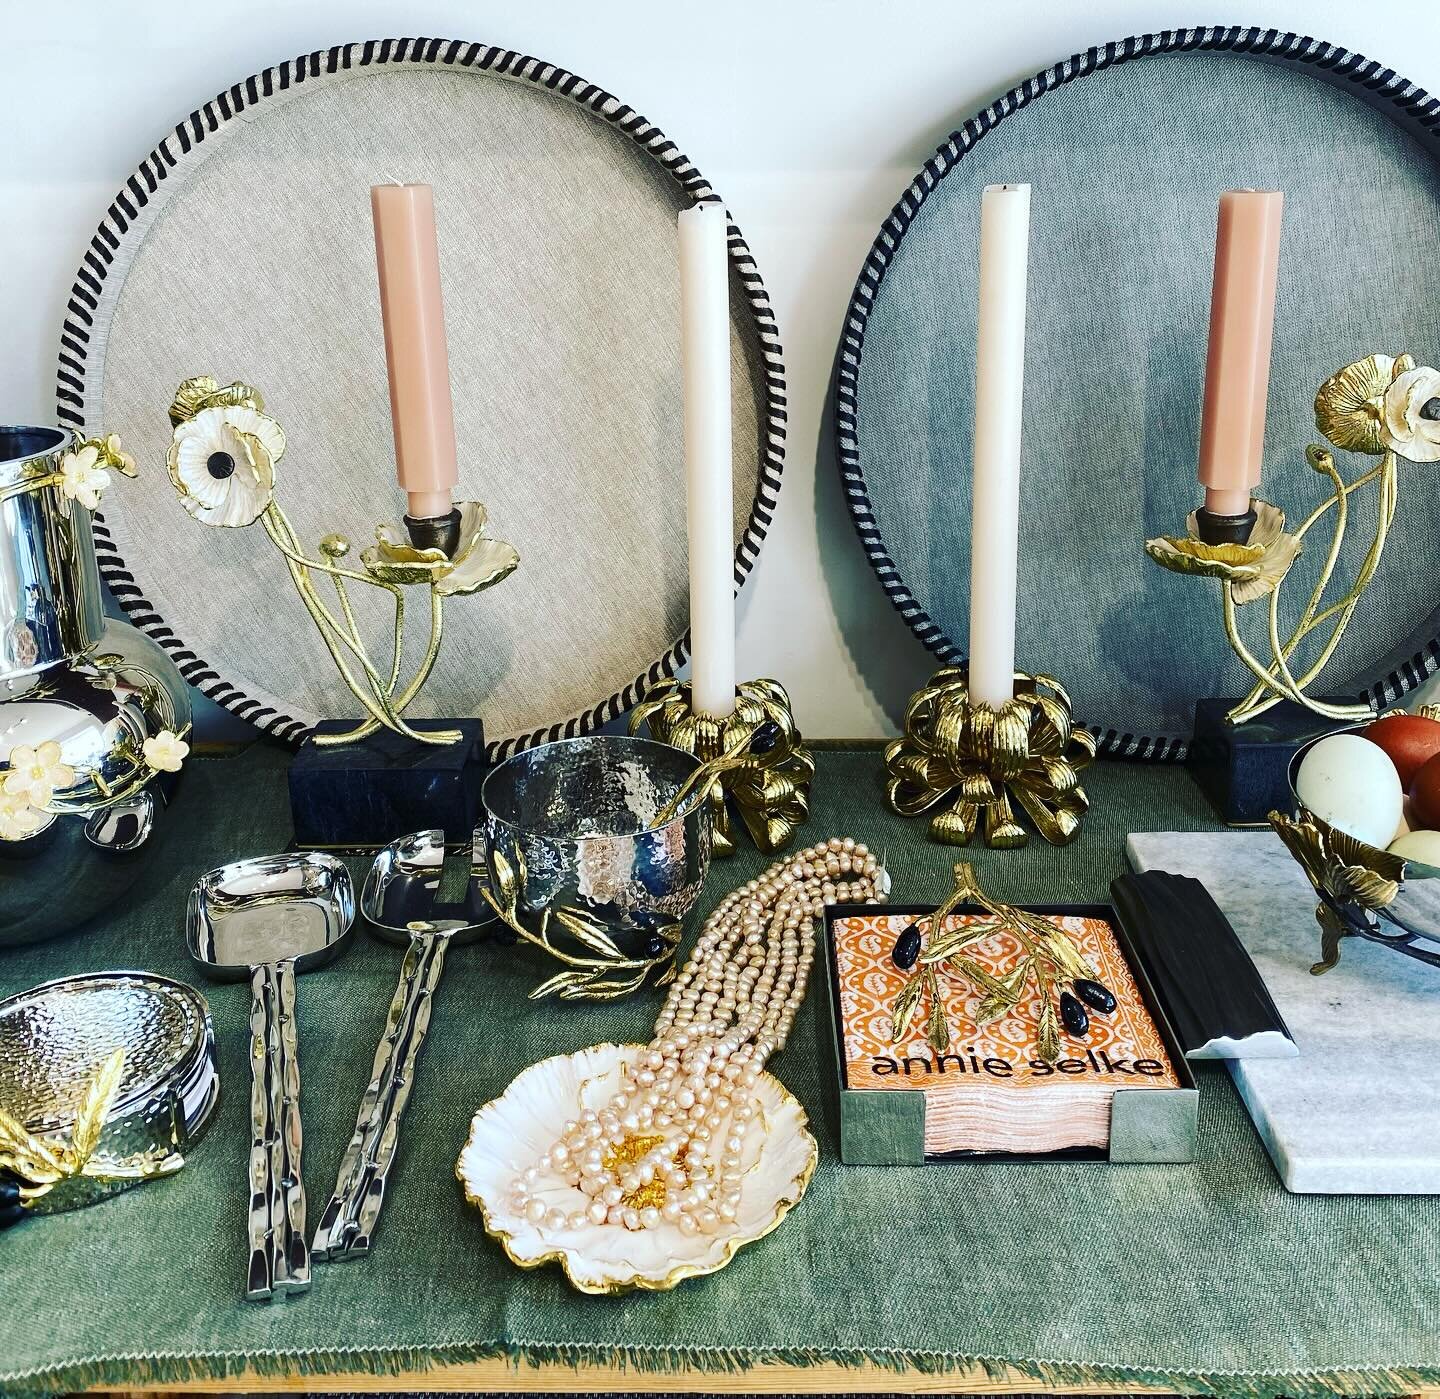 Spring is definitely in the air today☀️. We are open 10-5:00 and showcasing this beautiful spring collection from @giadablujewelry and @michaelaram .  Stunning pink pearls, blush cherry petals, anemones and blush candlesticks make the best table sett